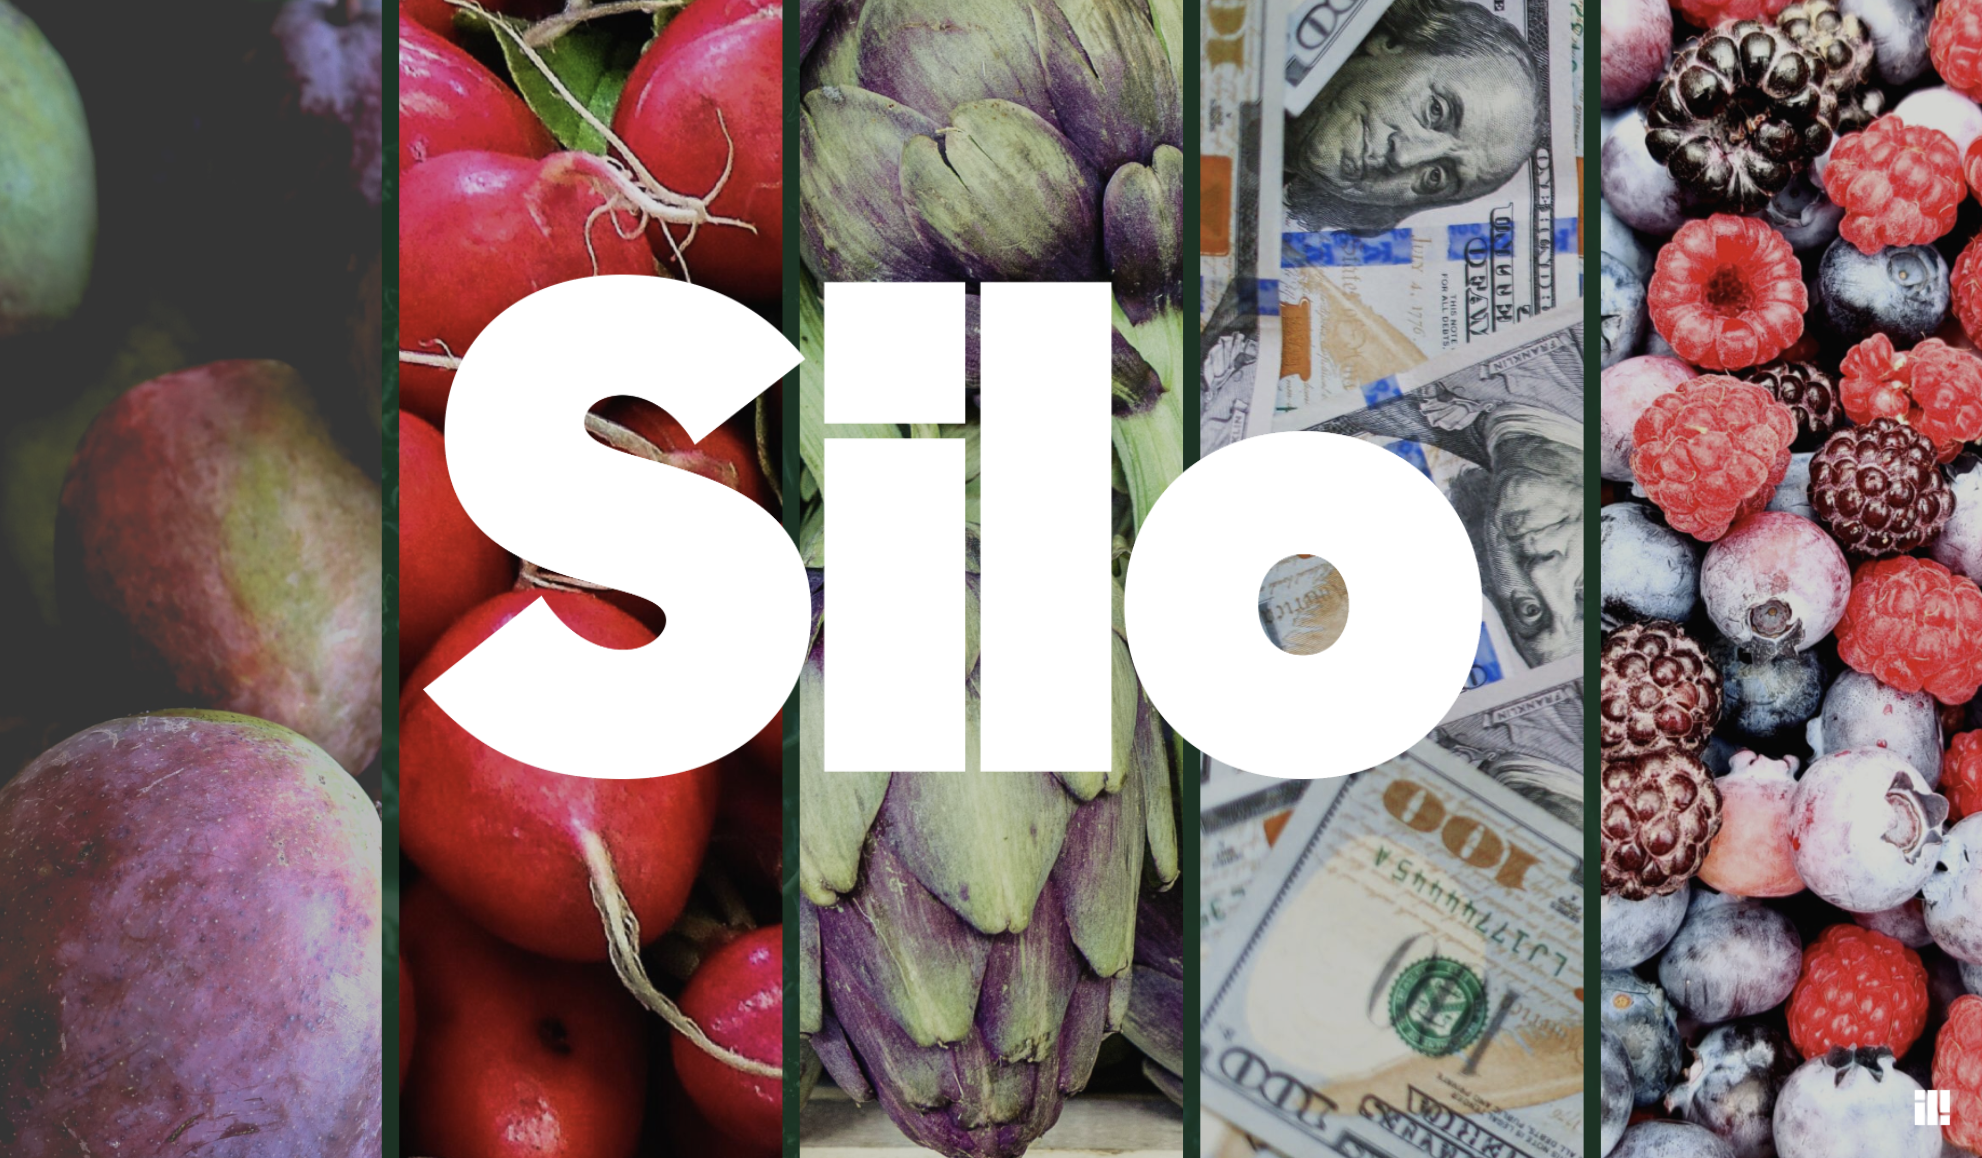 Why Silo’s Capital Solutions Make Sense for Your Produce Business